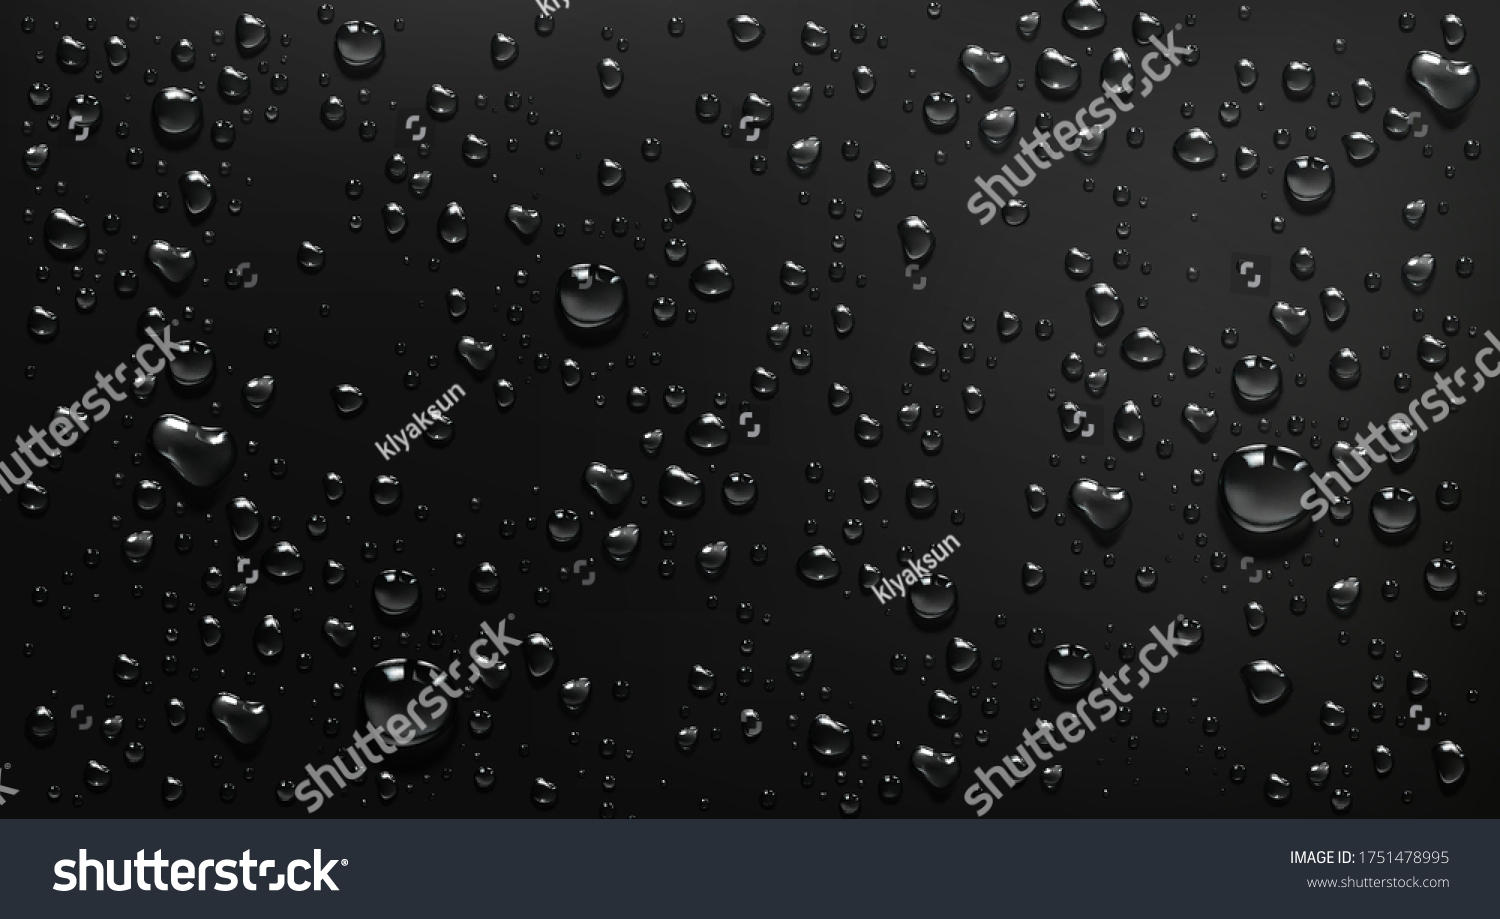 Condensation water drops on black glass background. Rain droplets with light reflection on dark window surface, abstract wet texture, scattered pure aqua blobs pattern Realistic 3d vector illustration #1751478995